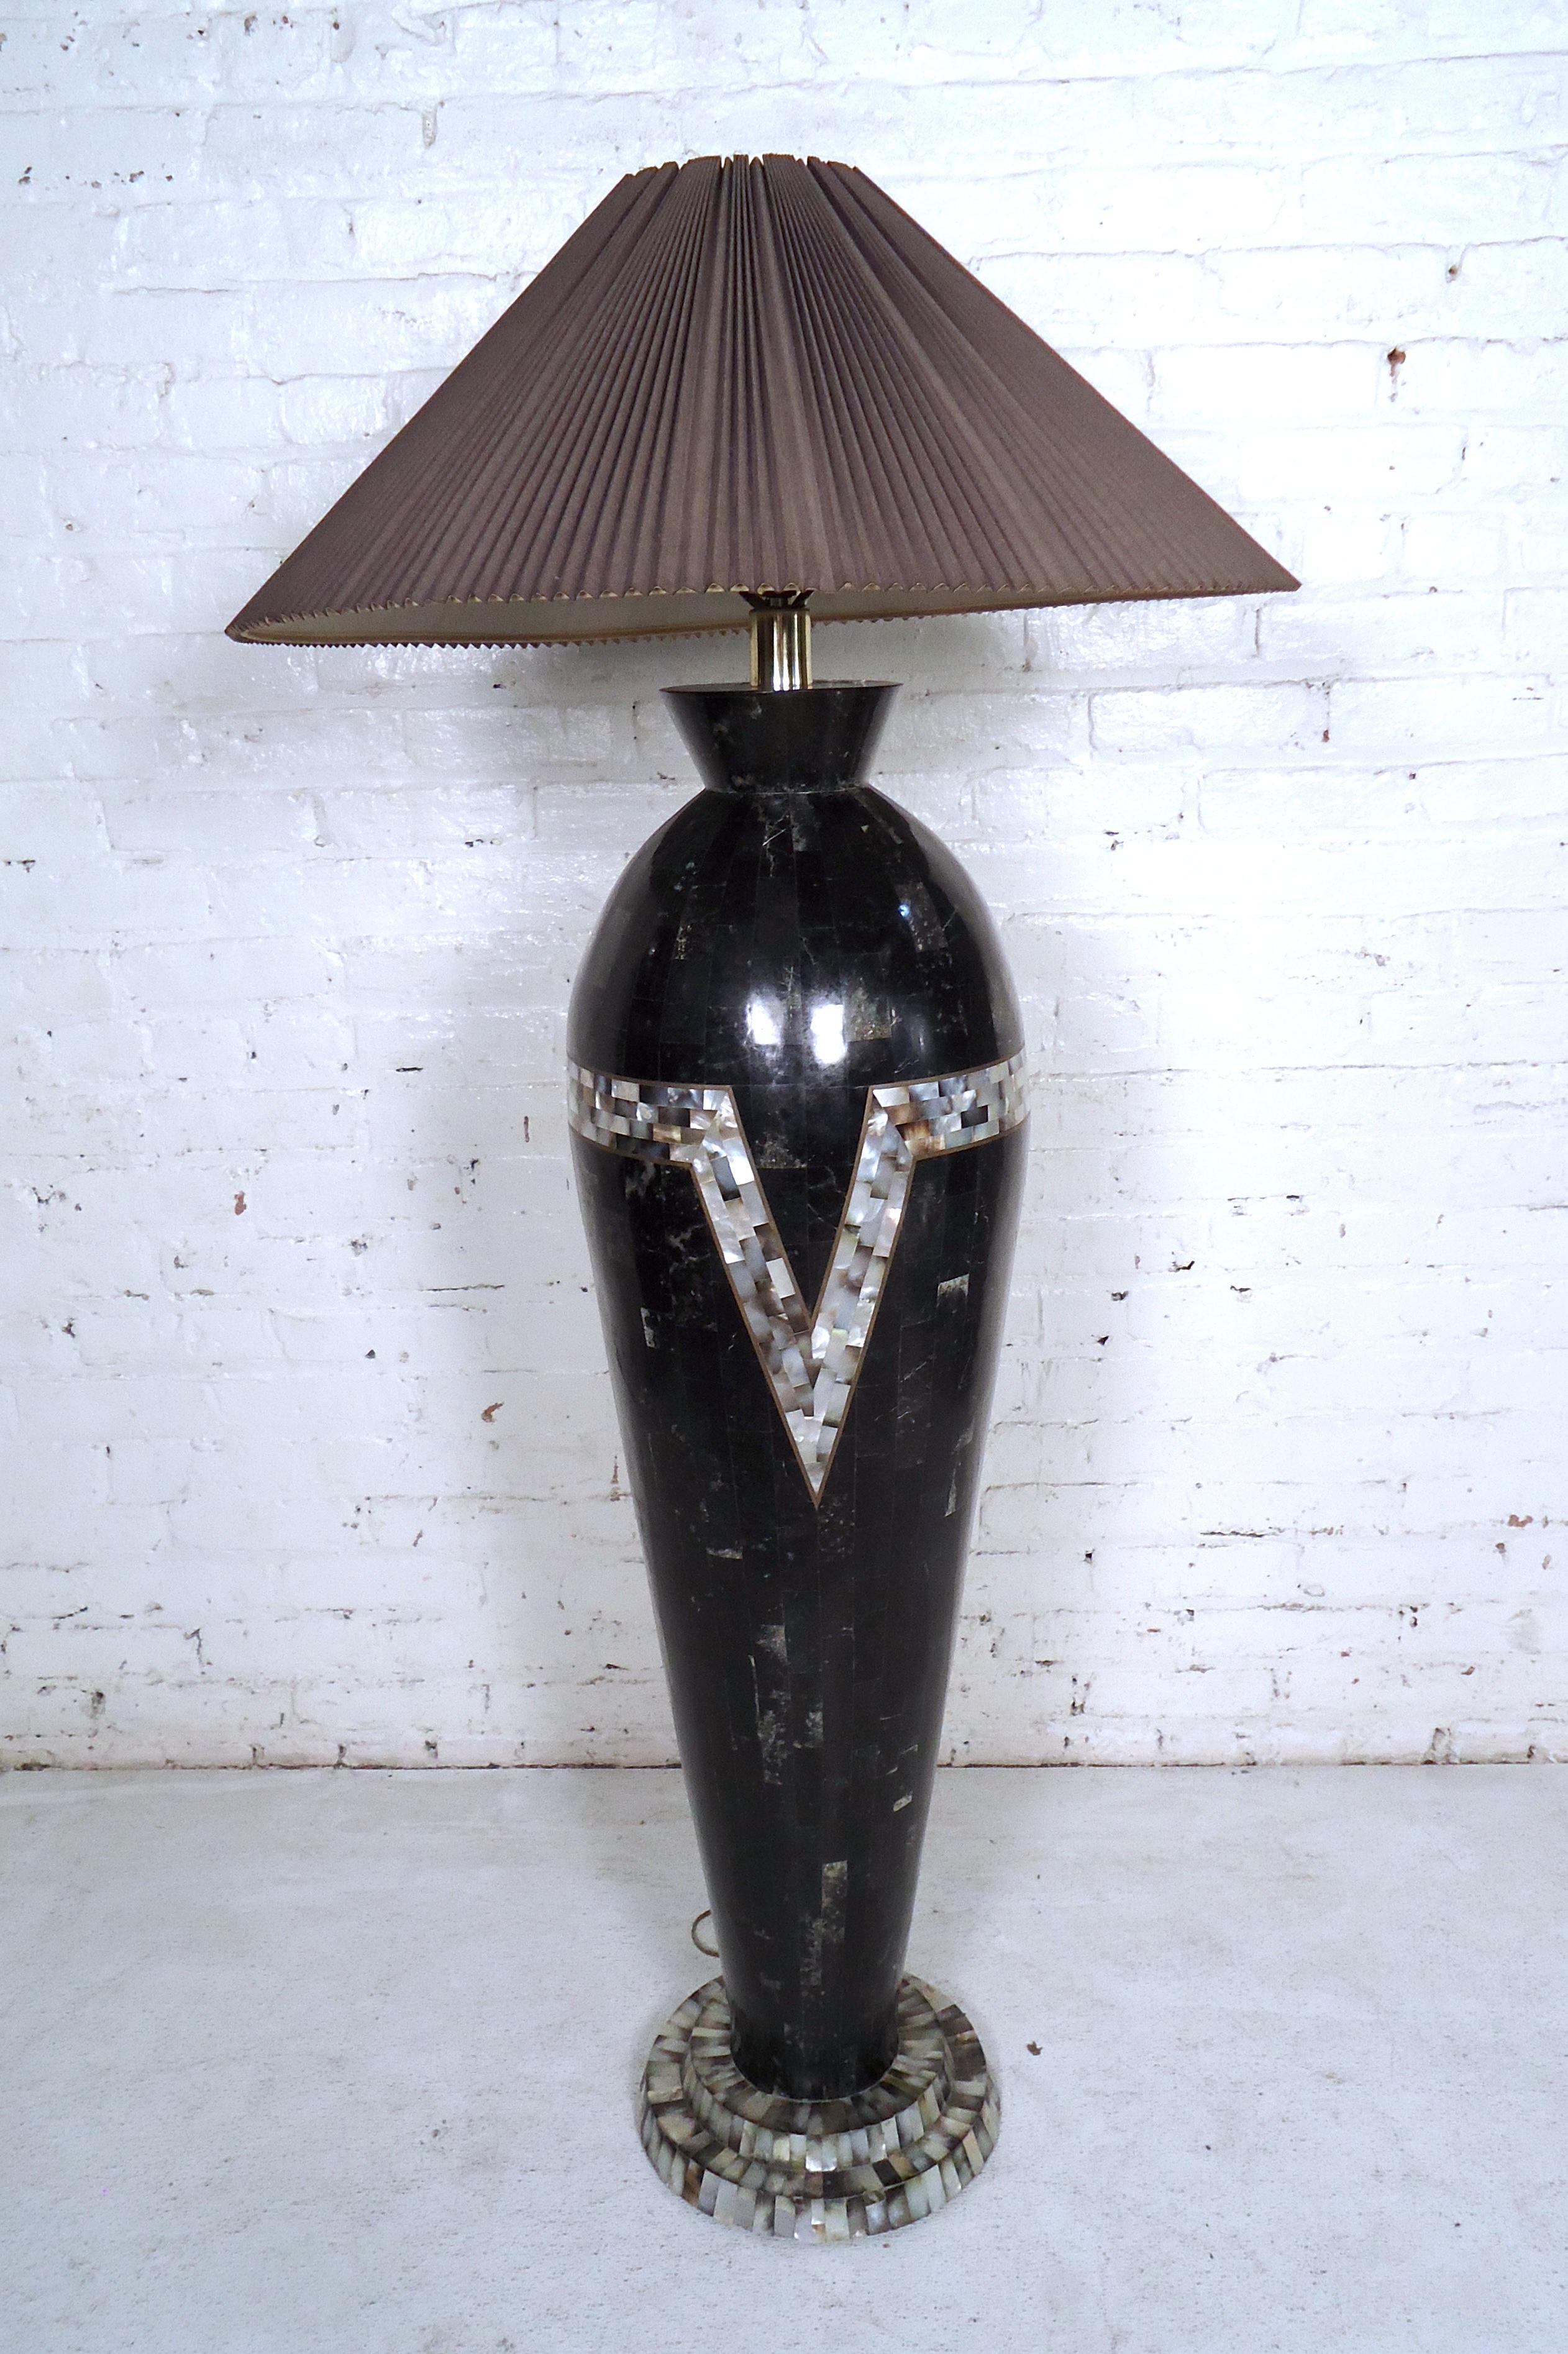 Beautiful vintage modern black floor lamp featuring a unique mosaic tile design throughout the centre and bottom.

(Please confirm item location - NY or NJ - with dealer).